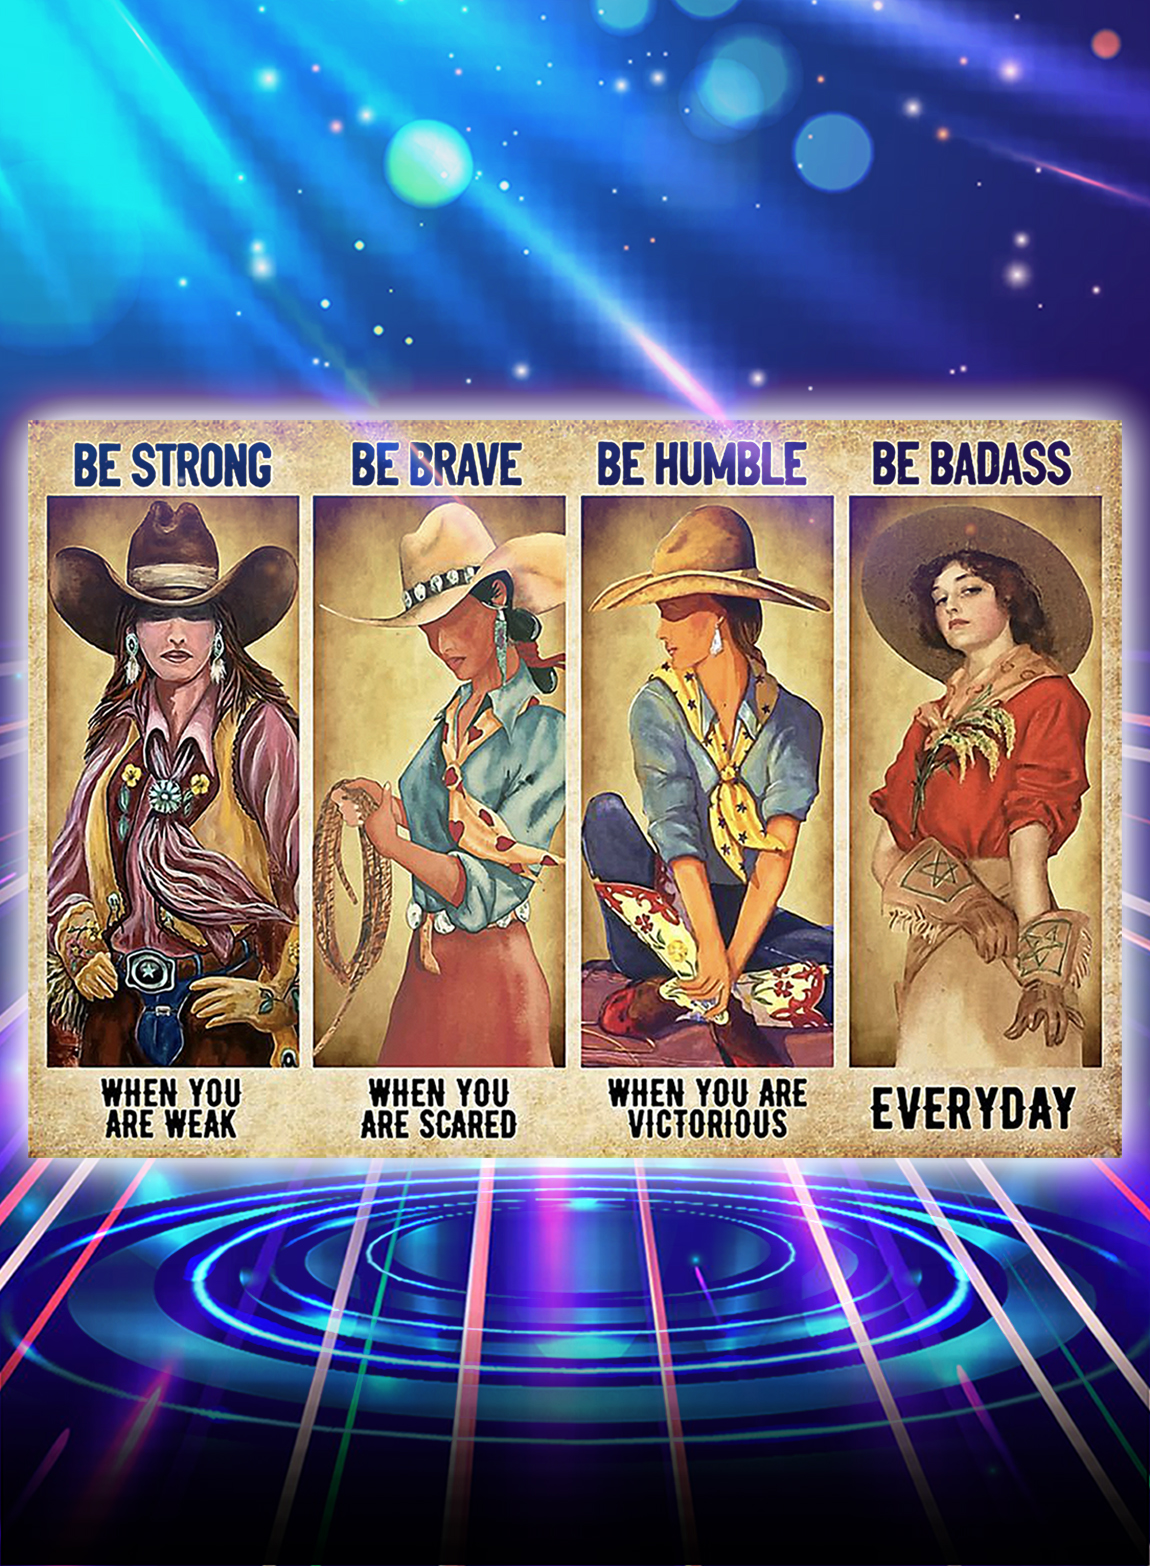 Cowgirl be strong be brave be humble be badass poster - A2